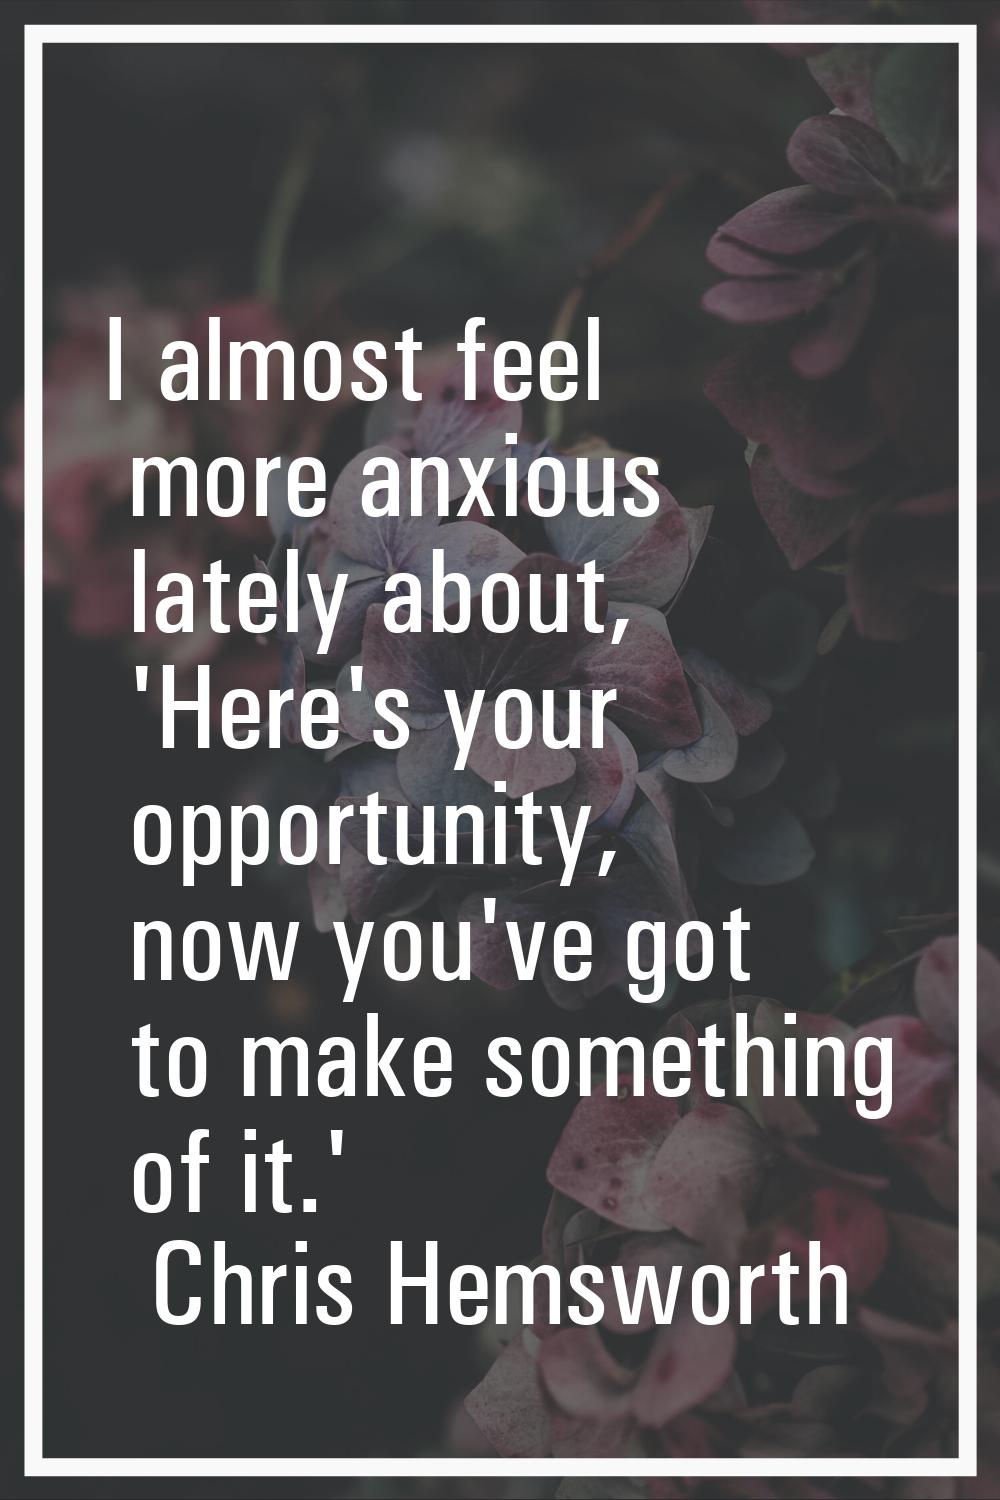 I almost feel more anxious lately about, 'Here's your opportunity, now you've got to make something